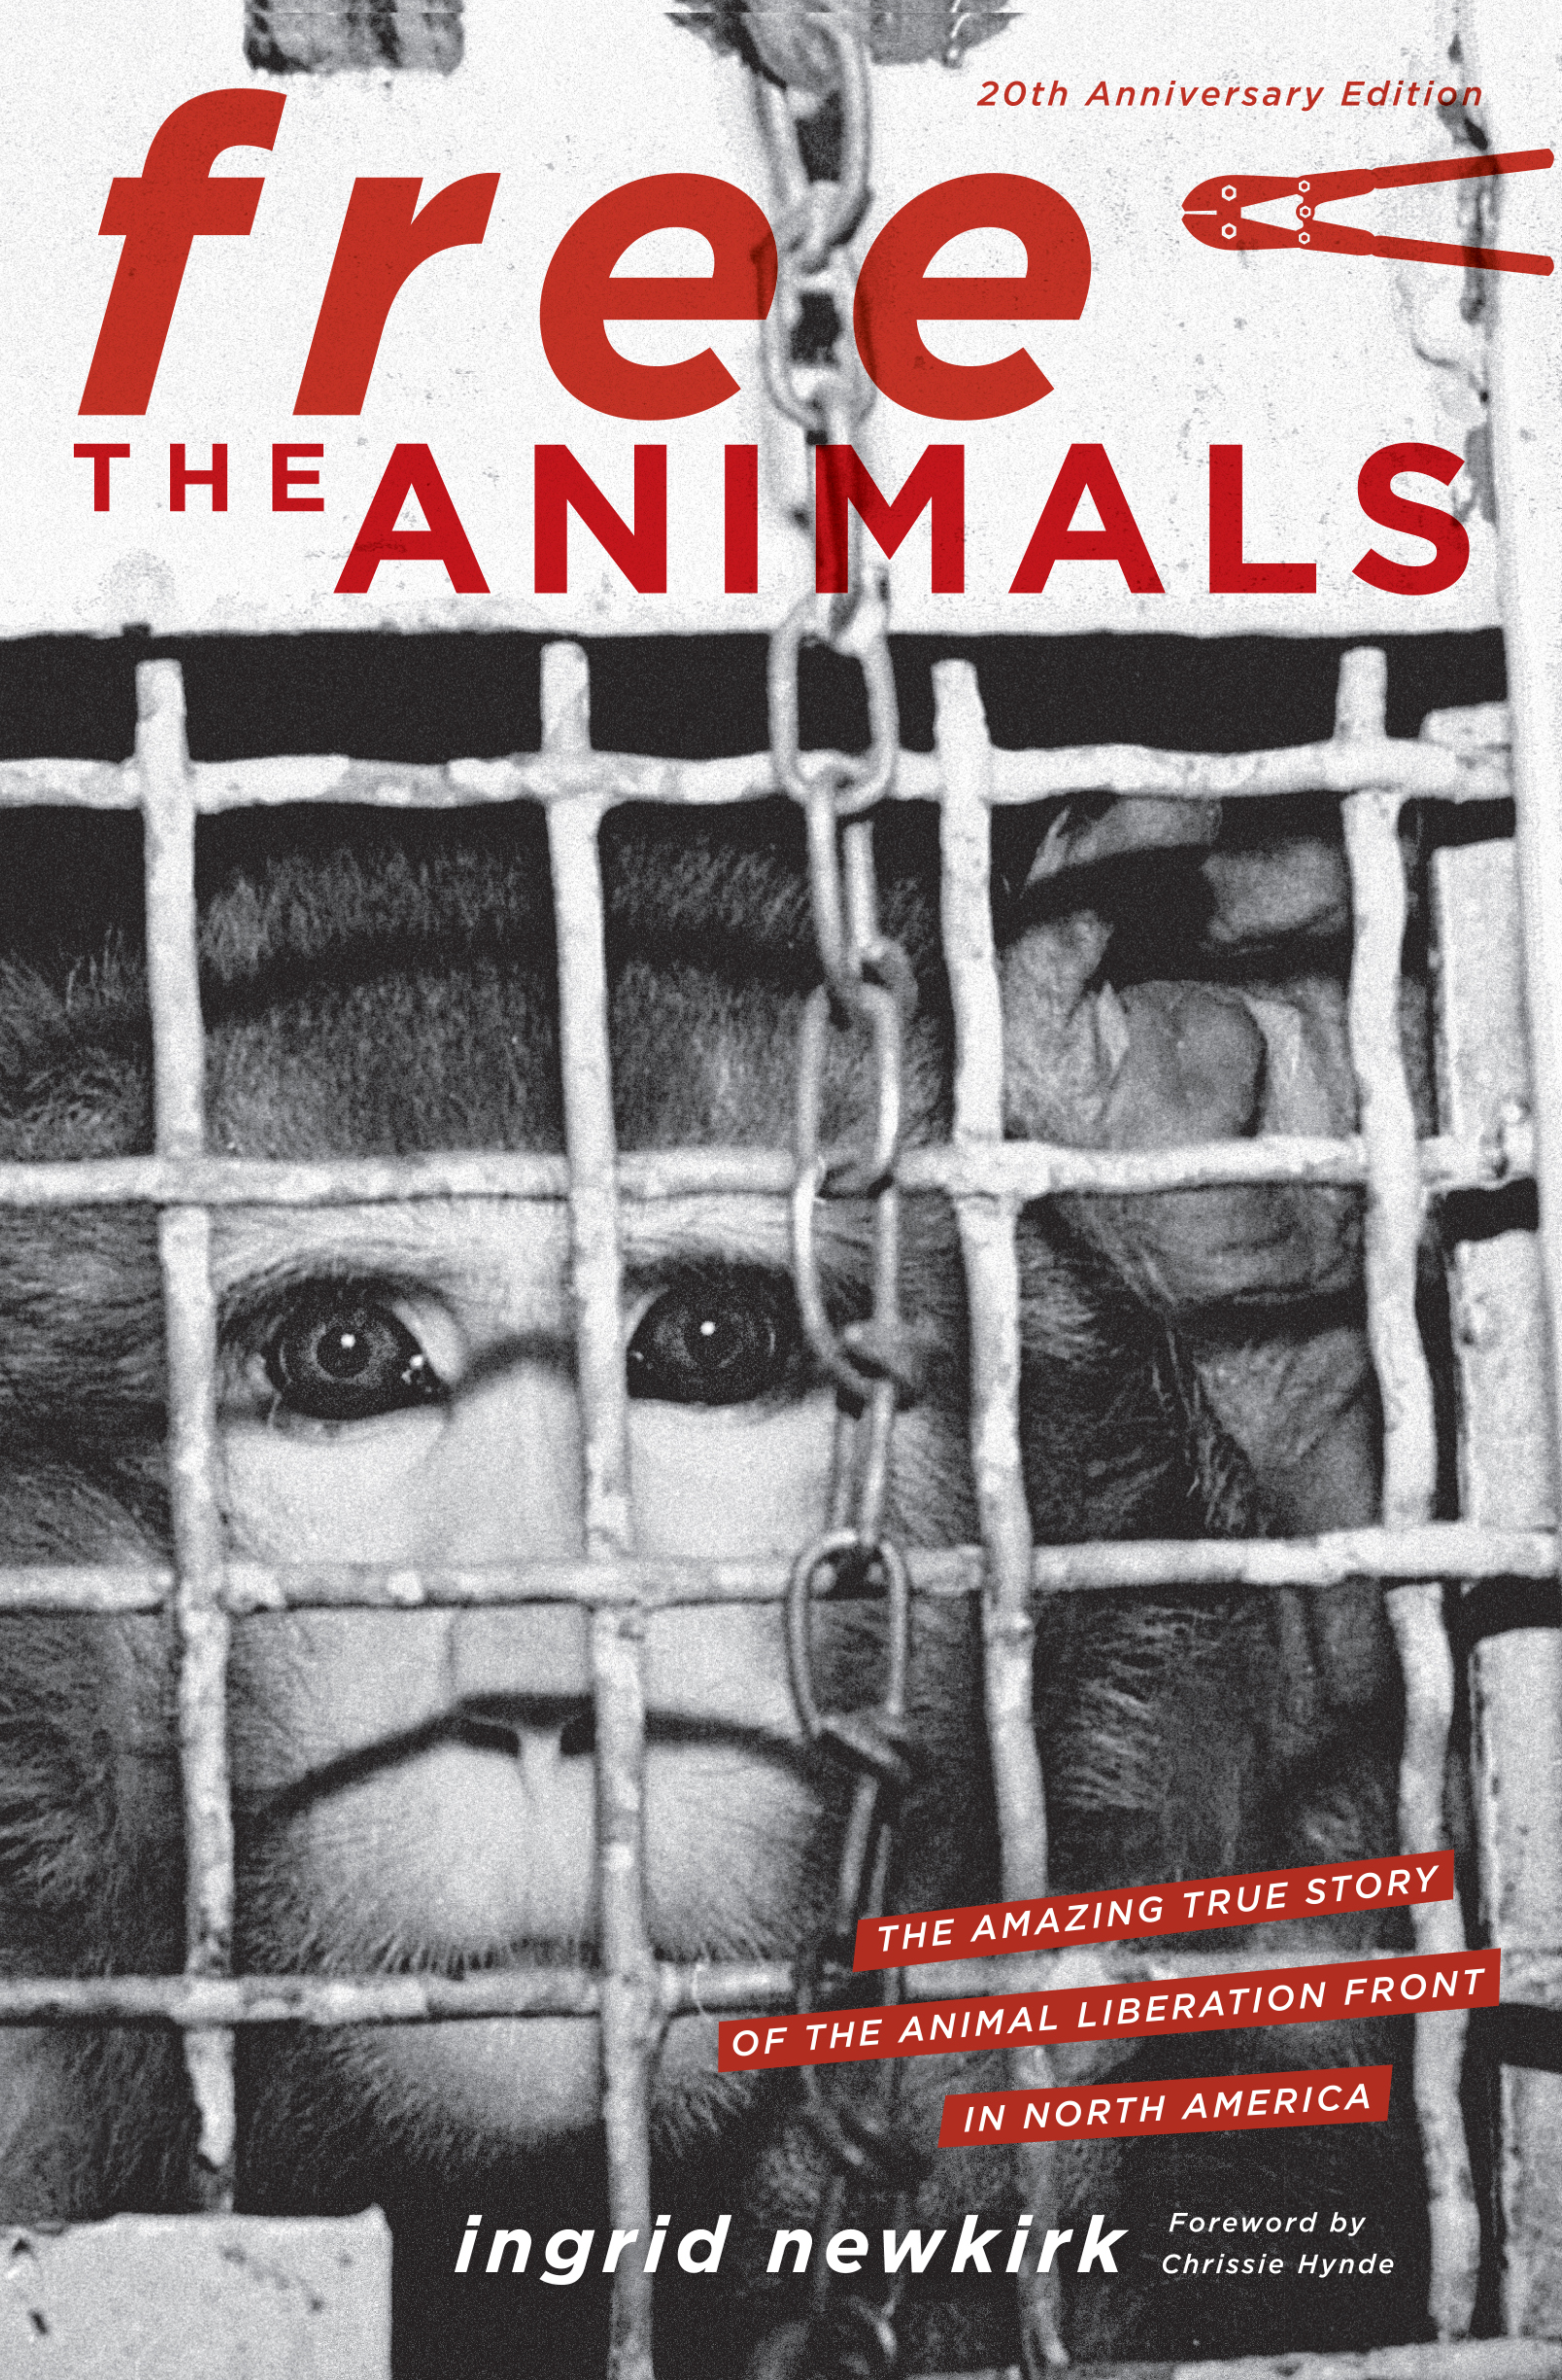 Welcome to Ingrid Newkirk's 'Free the Animals' Virtual Book Talk